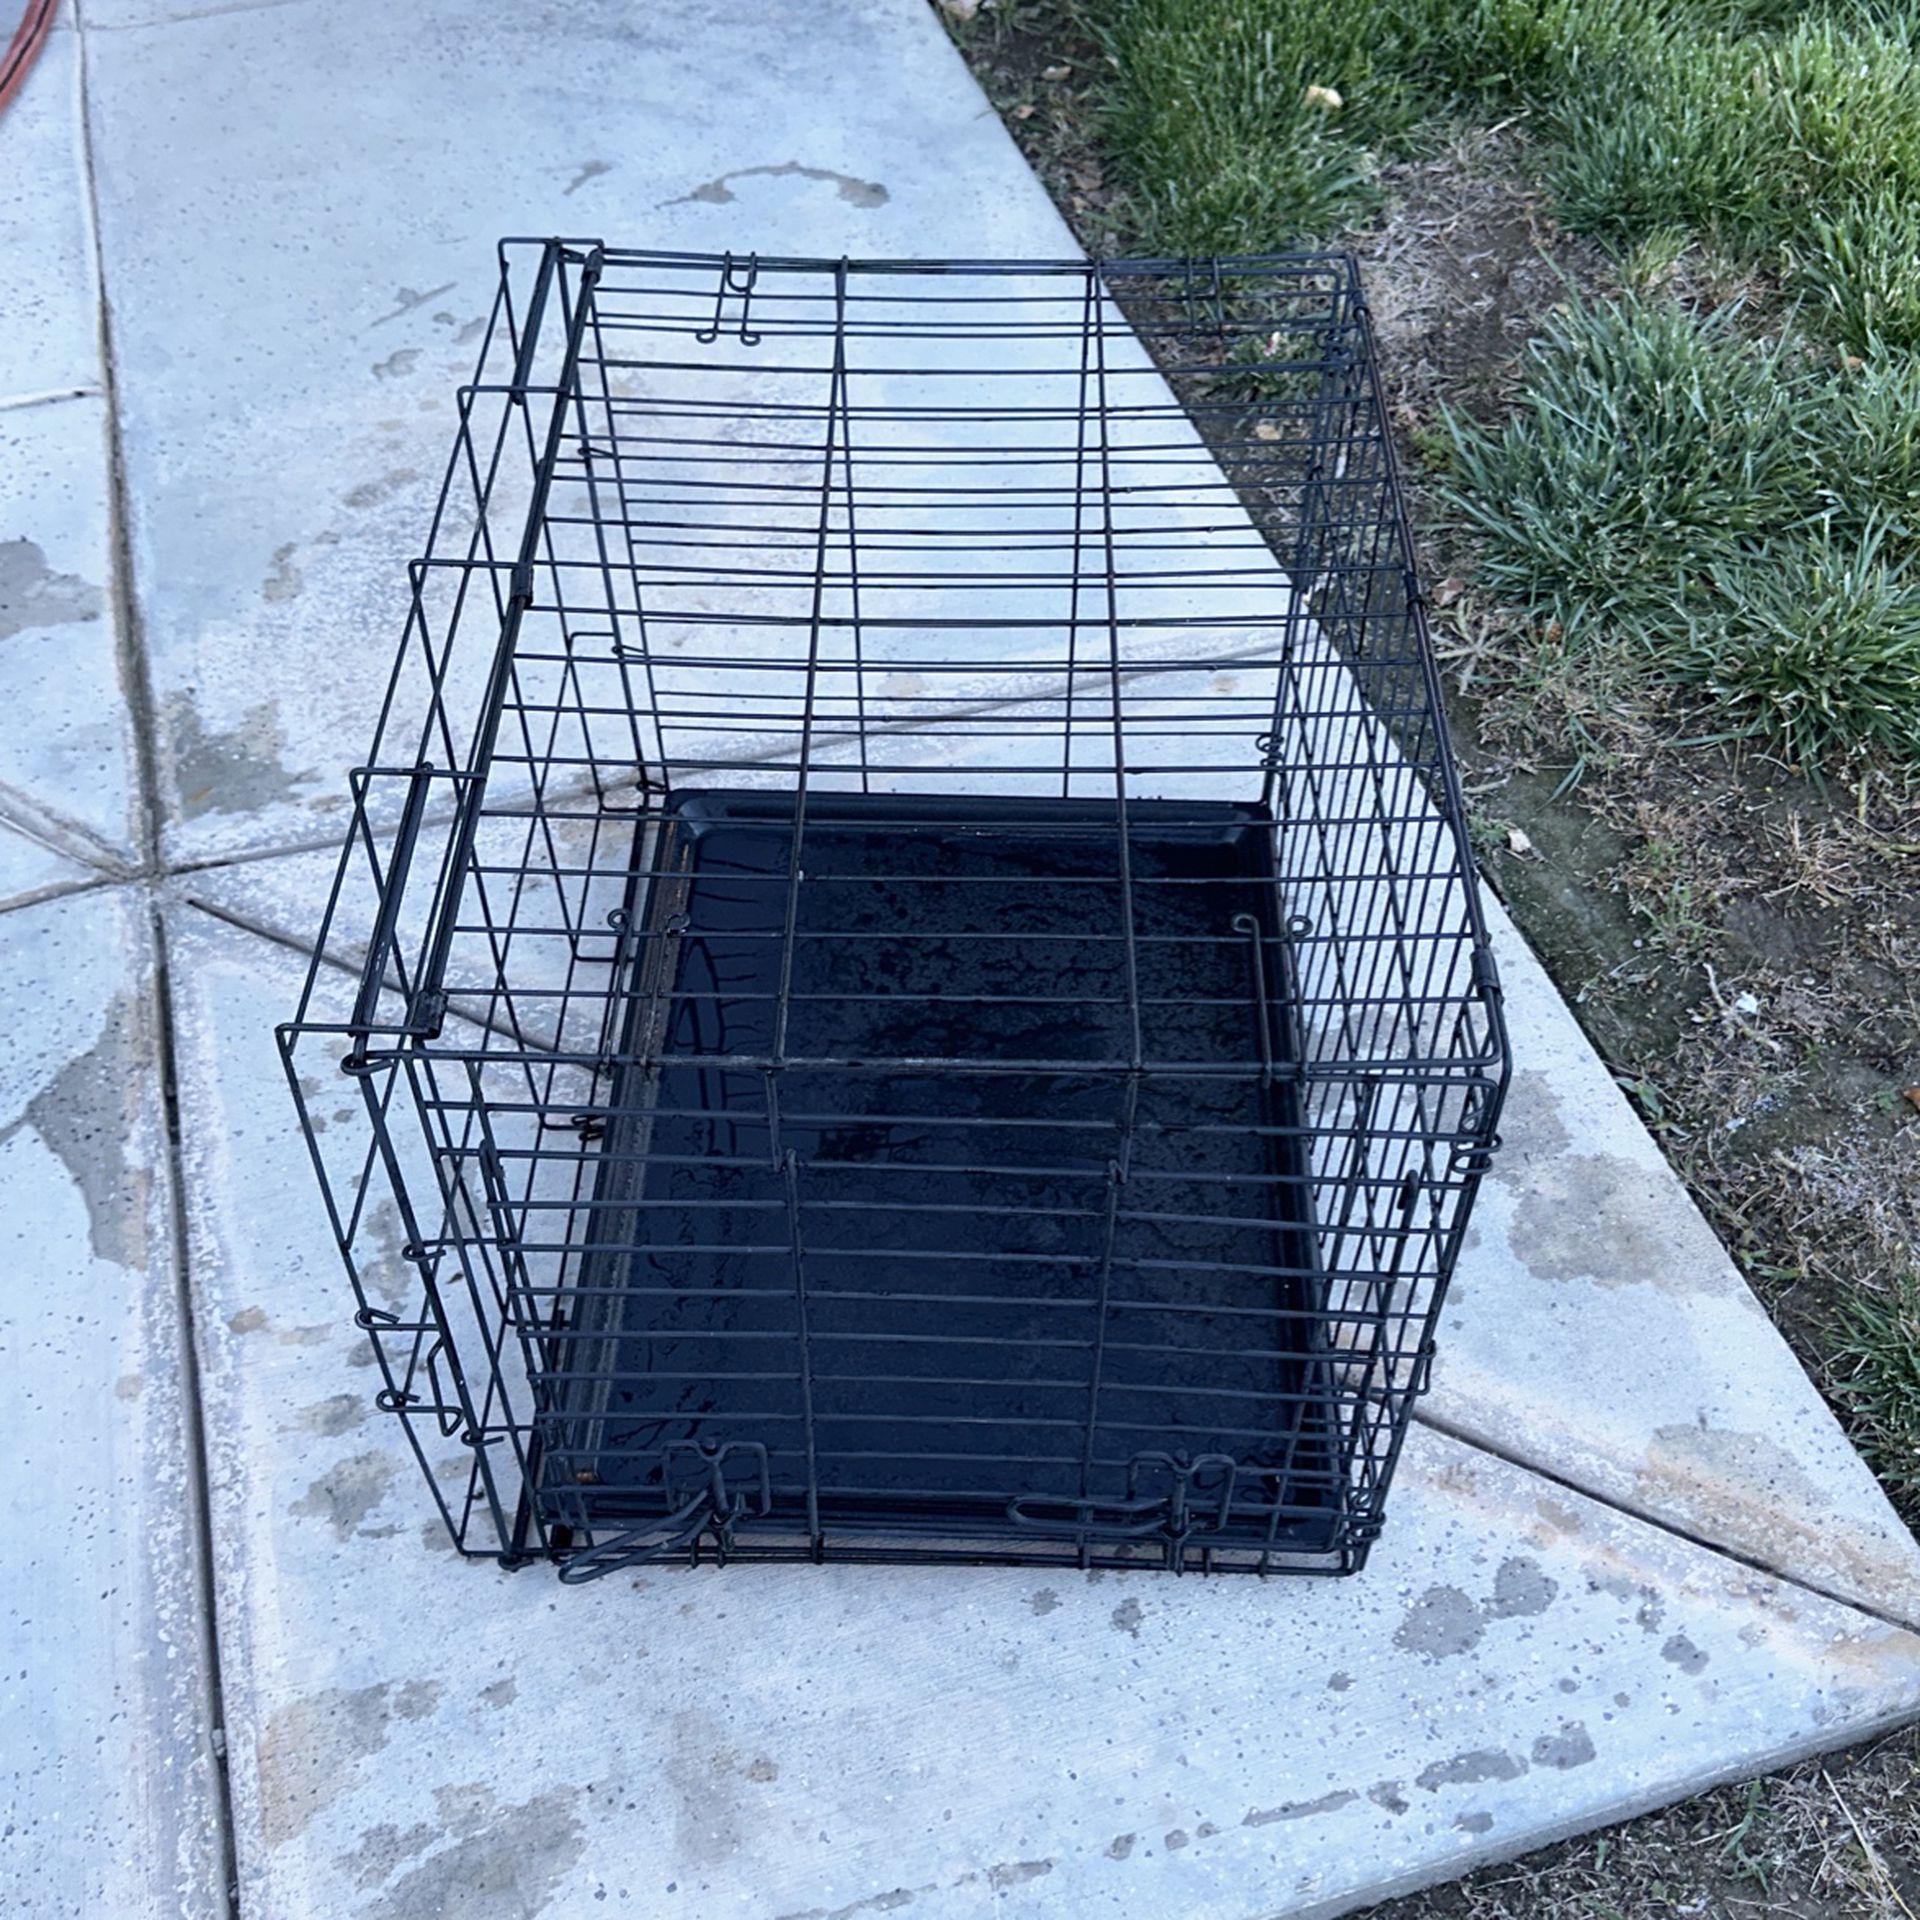 Small Dog Crate 